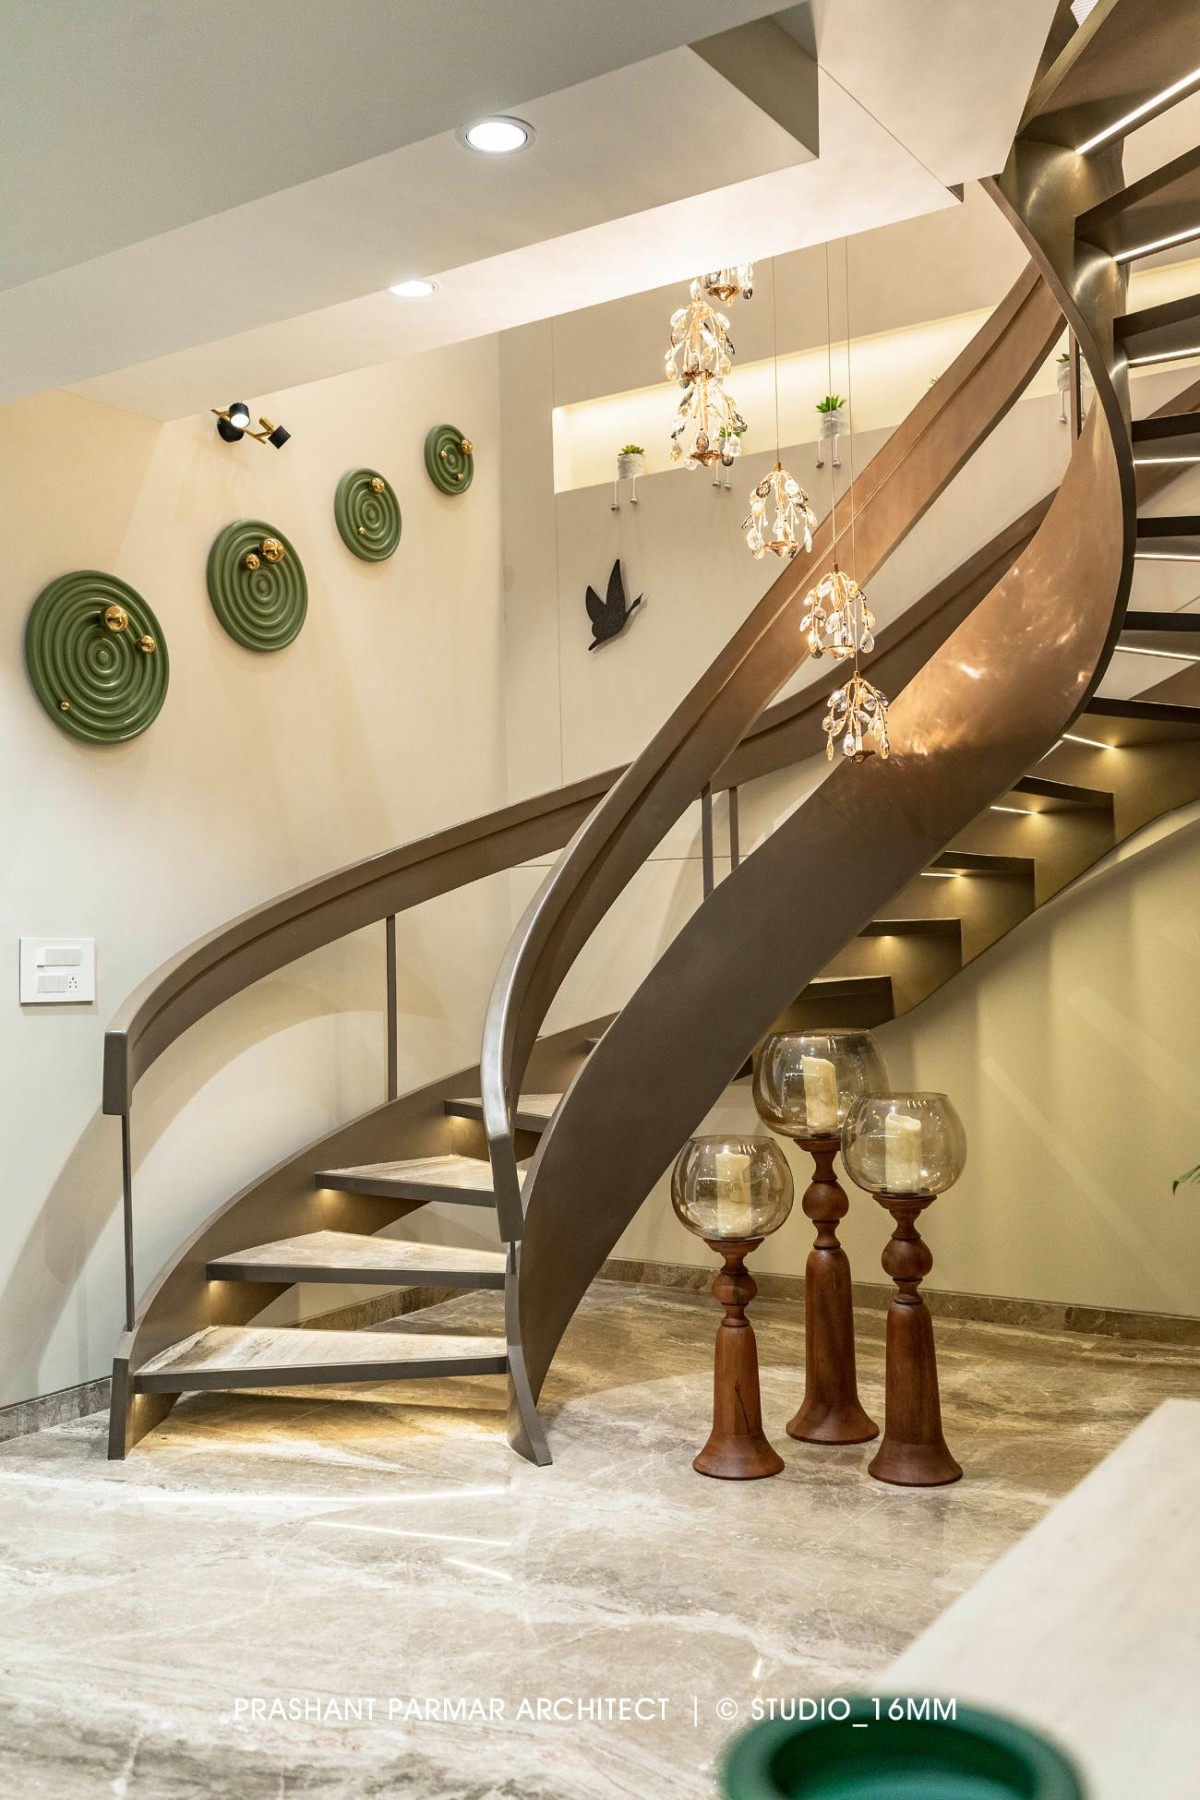 Staircase of Ultra-Modern Luxurious Penthouse by Prashant Parmar Architect - Shayona Consultant